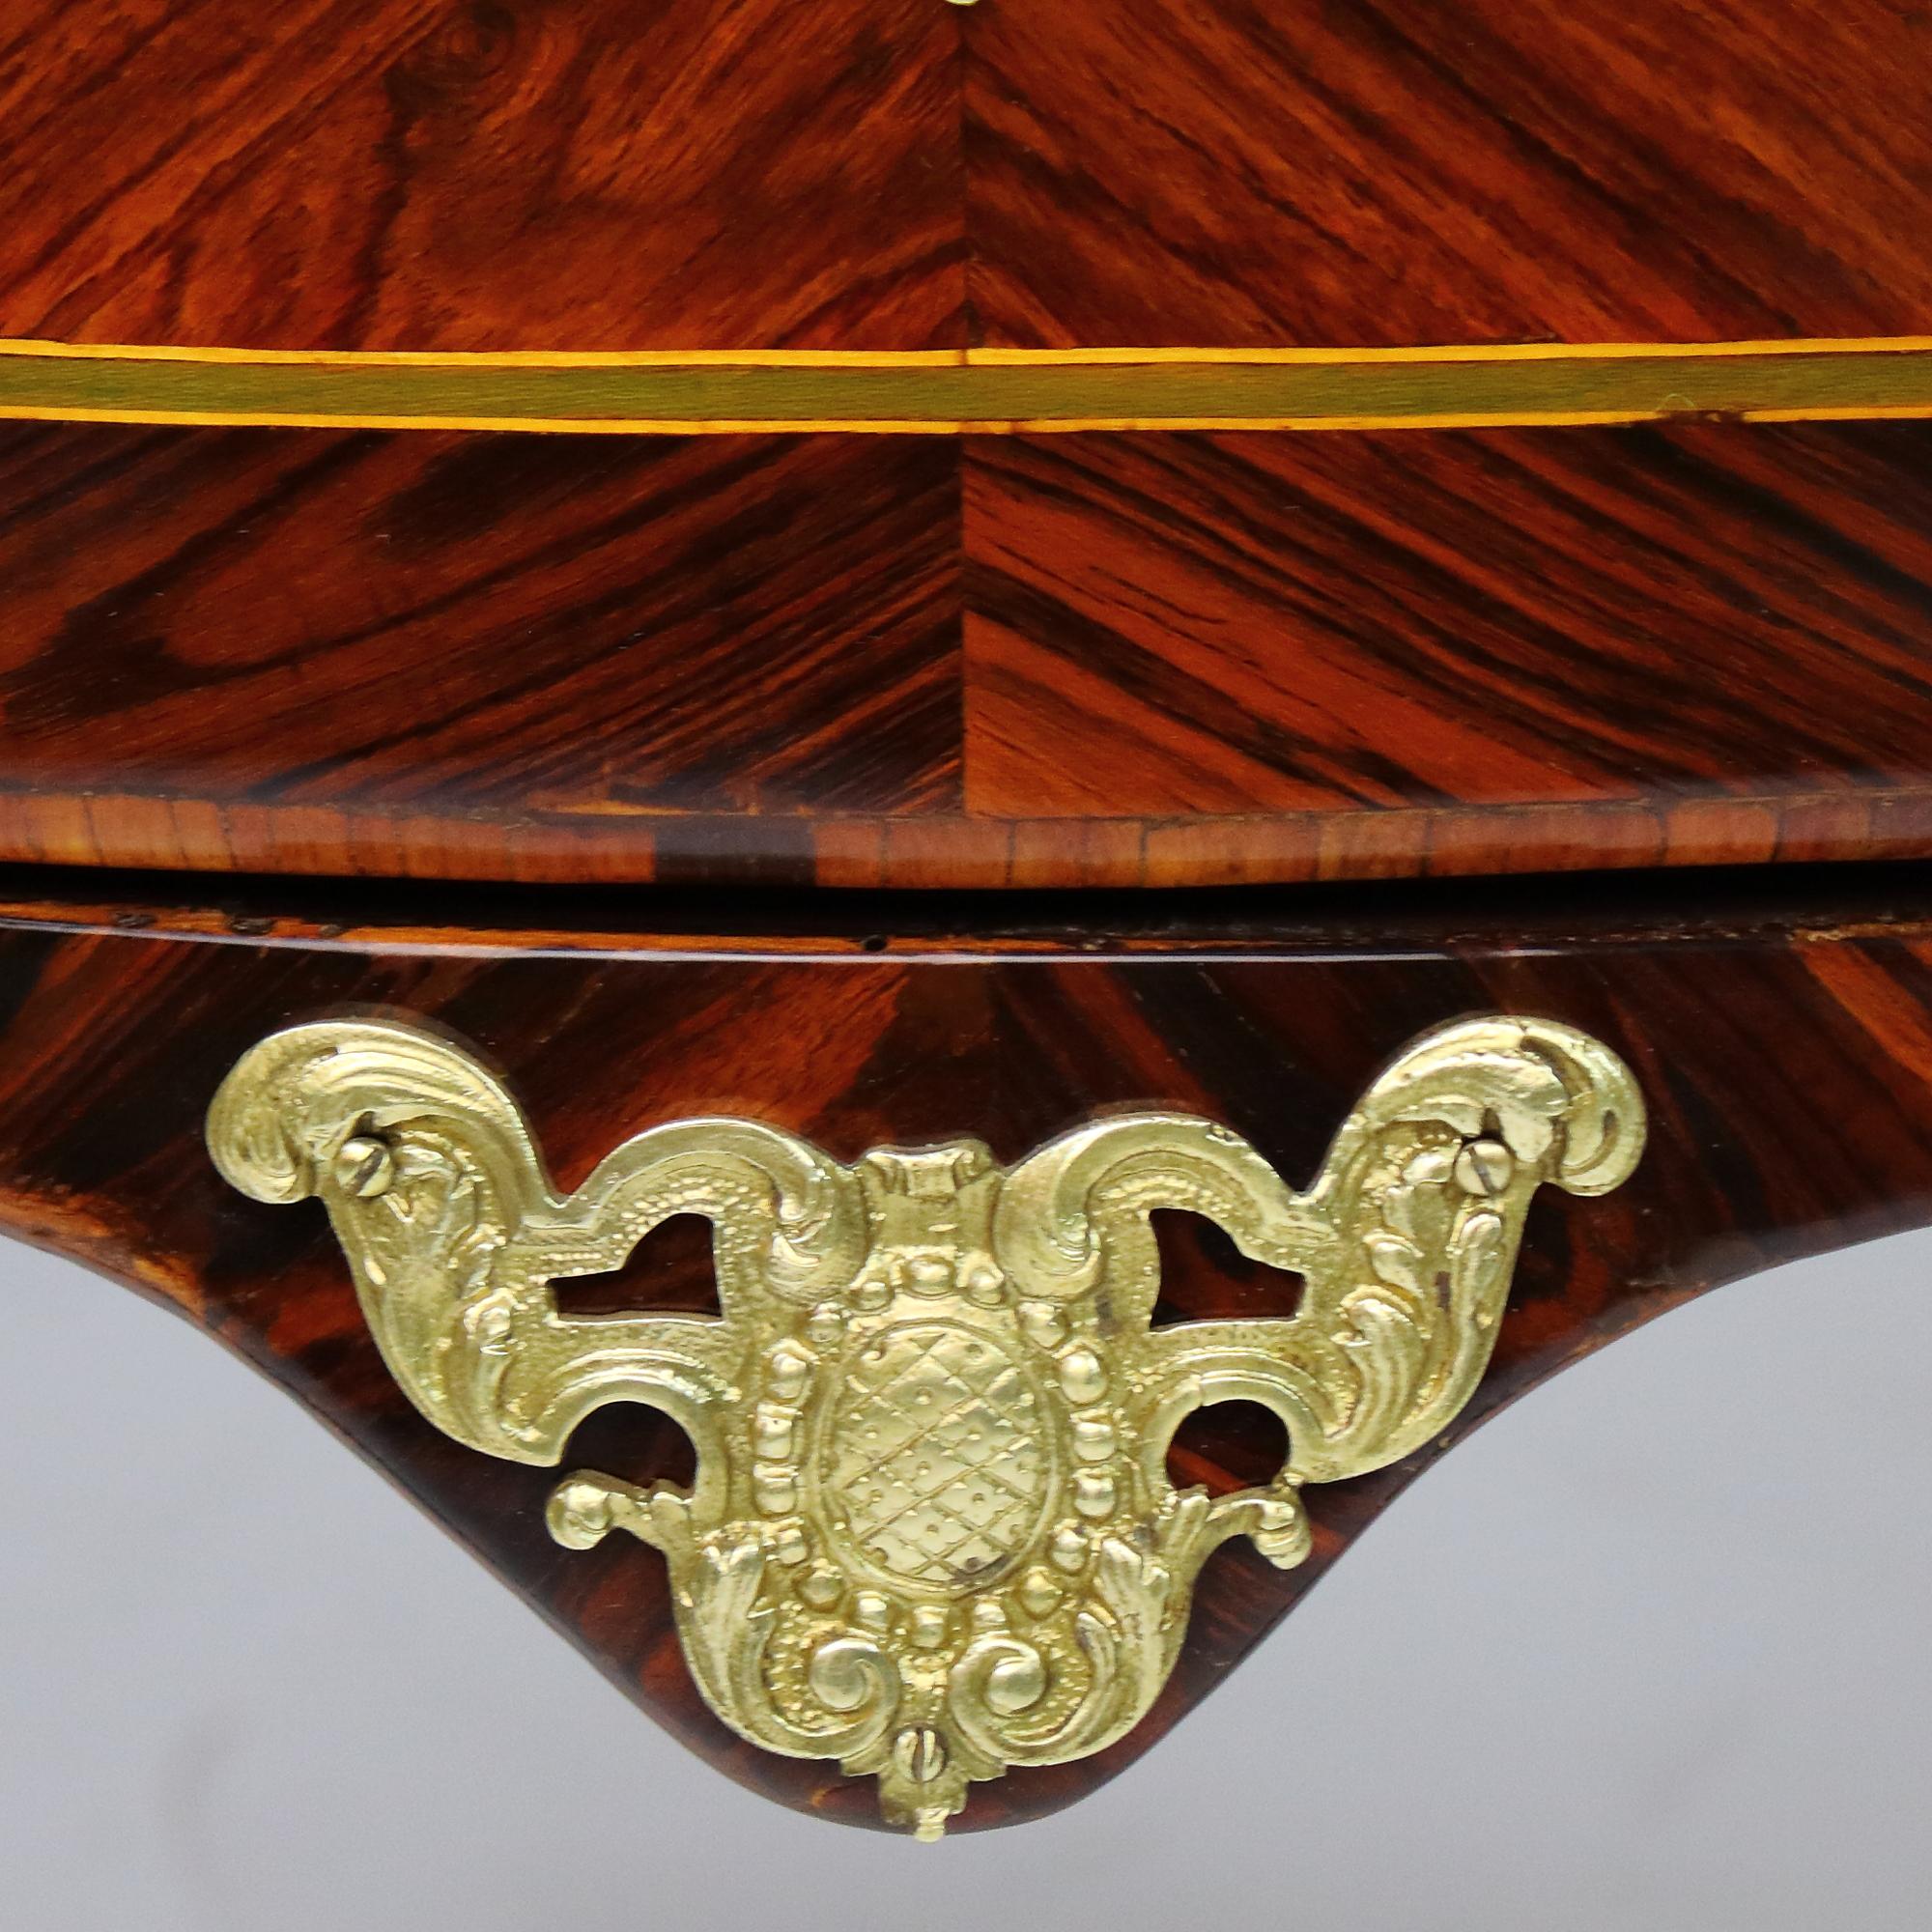 French 18th Century Small Louis XV Marquetry Commode, Stamped 